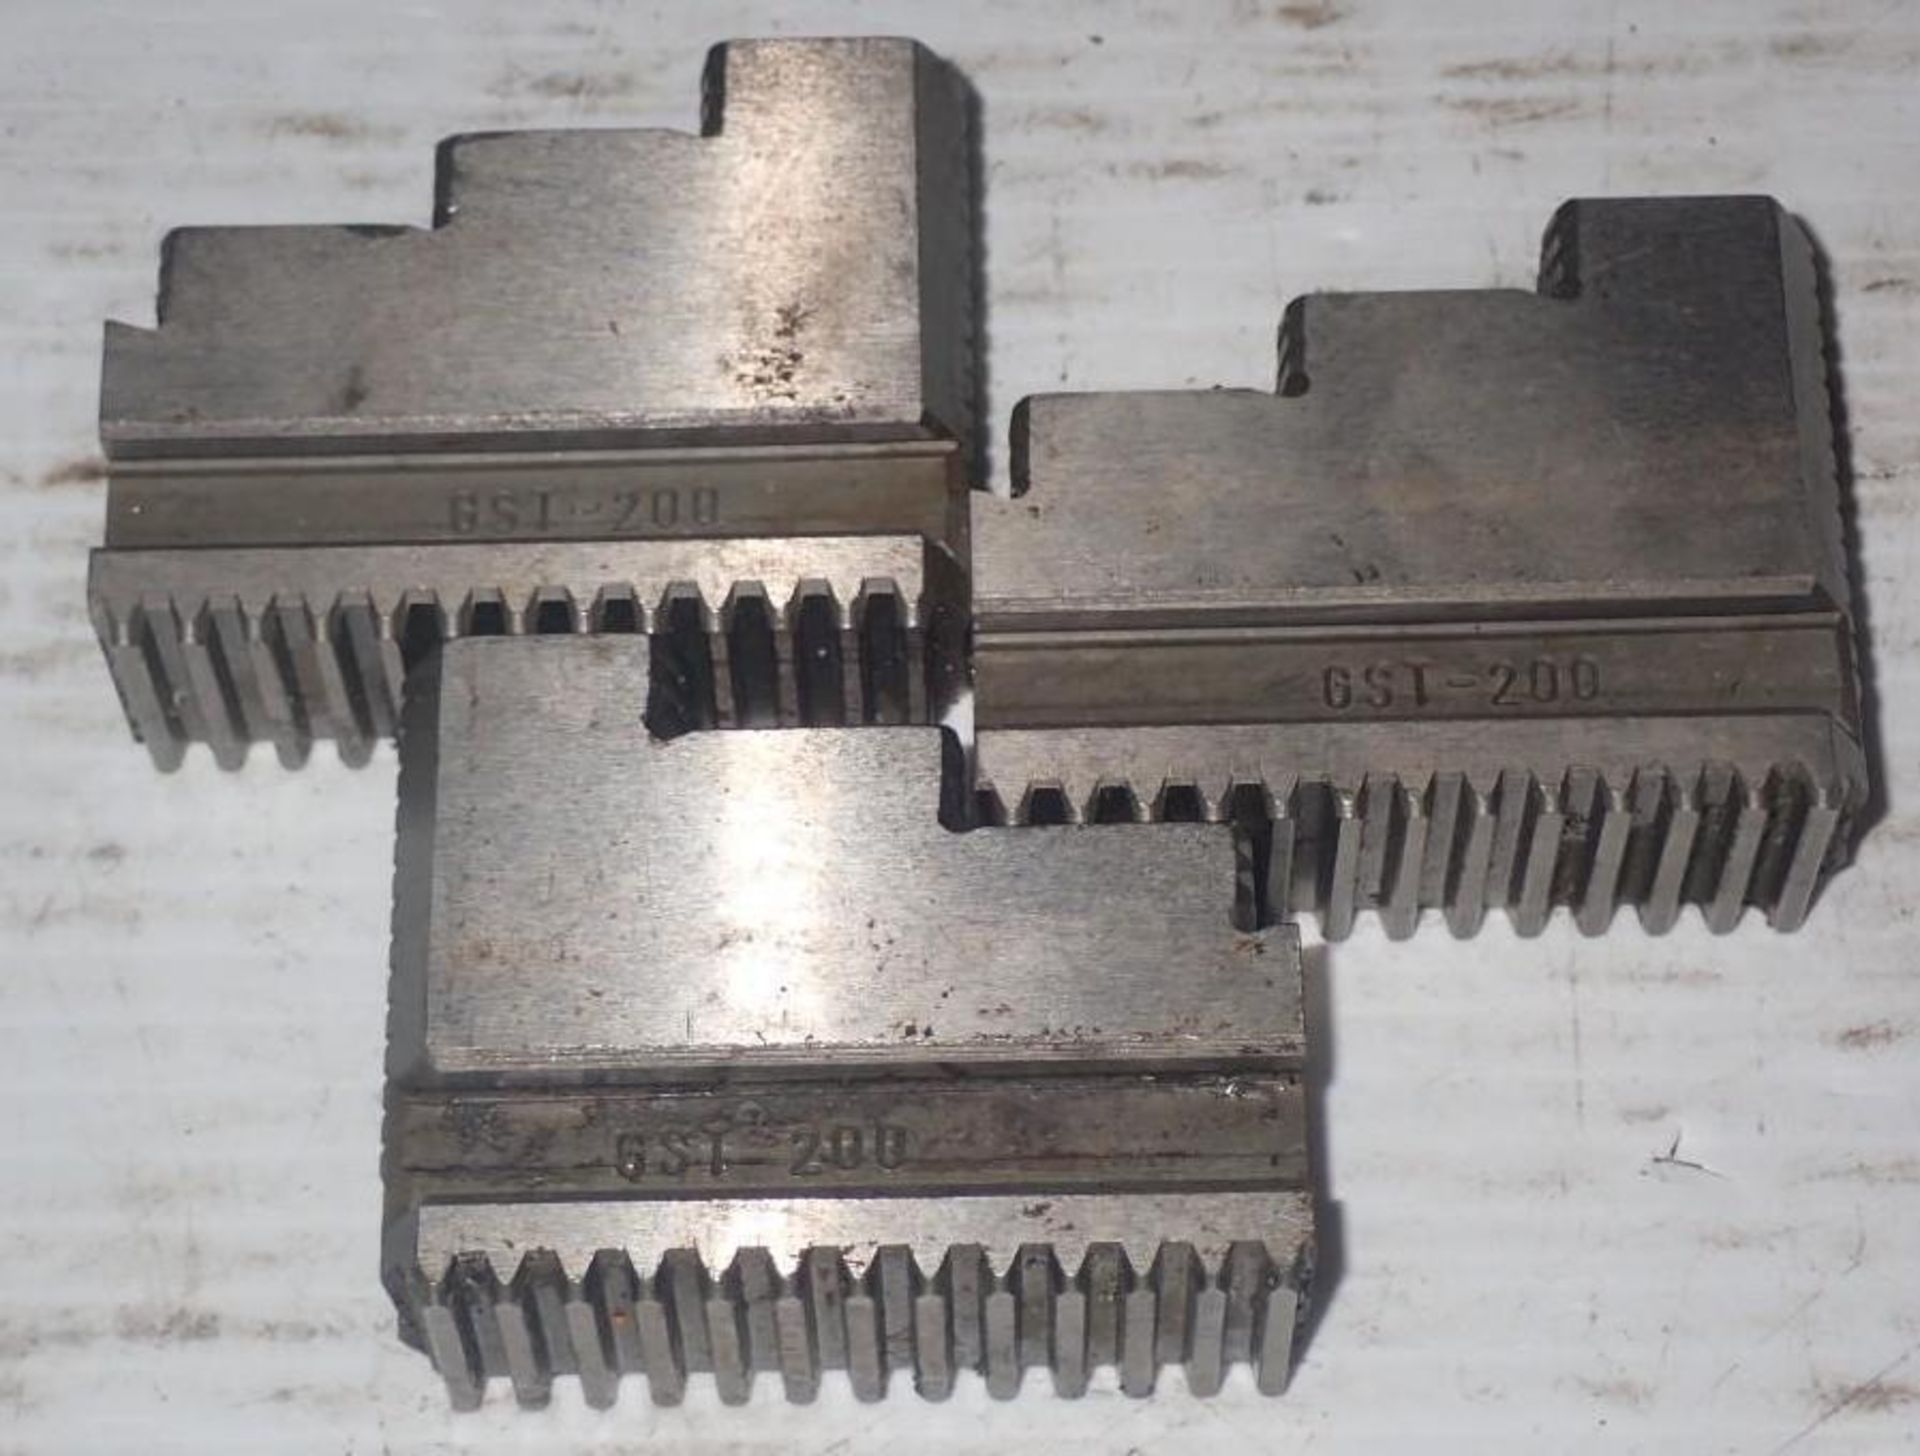 Lot of GST 200 Chuck Jaws - Image 4 of 4